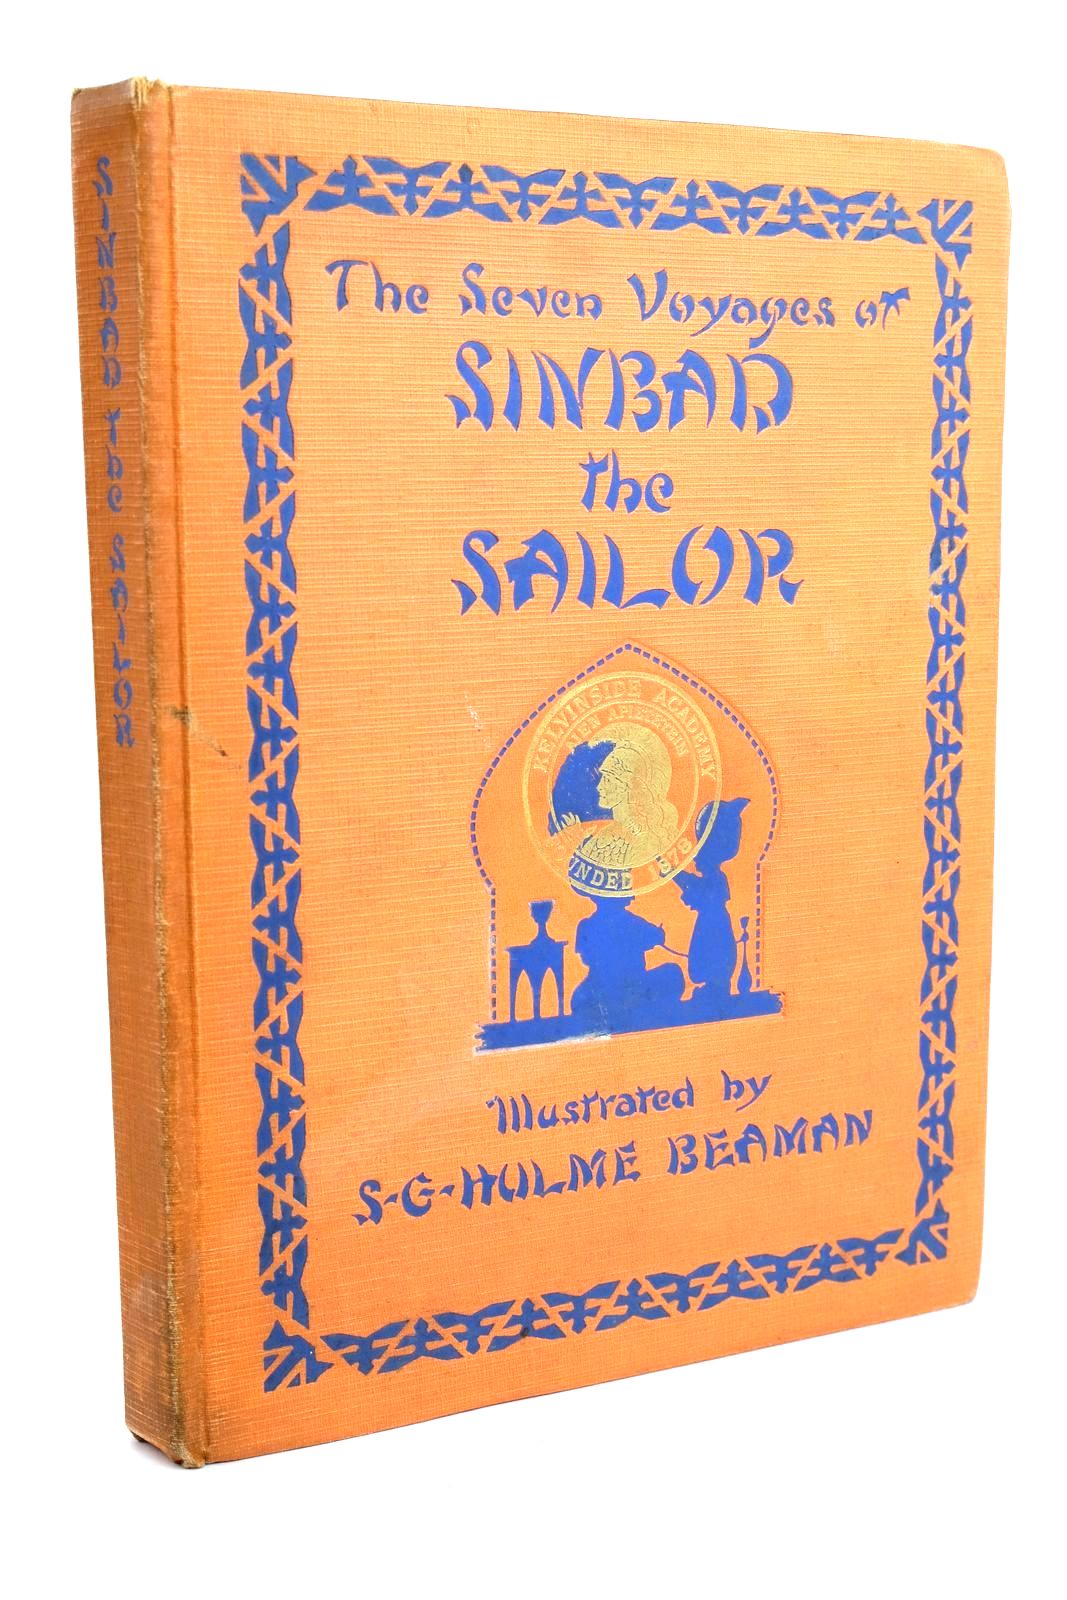 Photo of THE SEVEN VOYAGES OF SINBAD THE SAILOR- Stock Number: 1320427